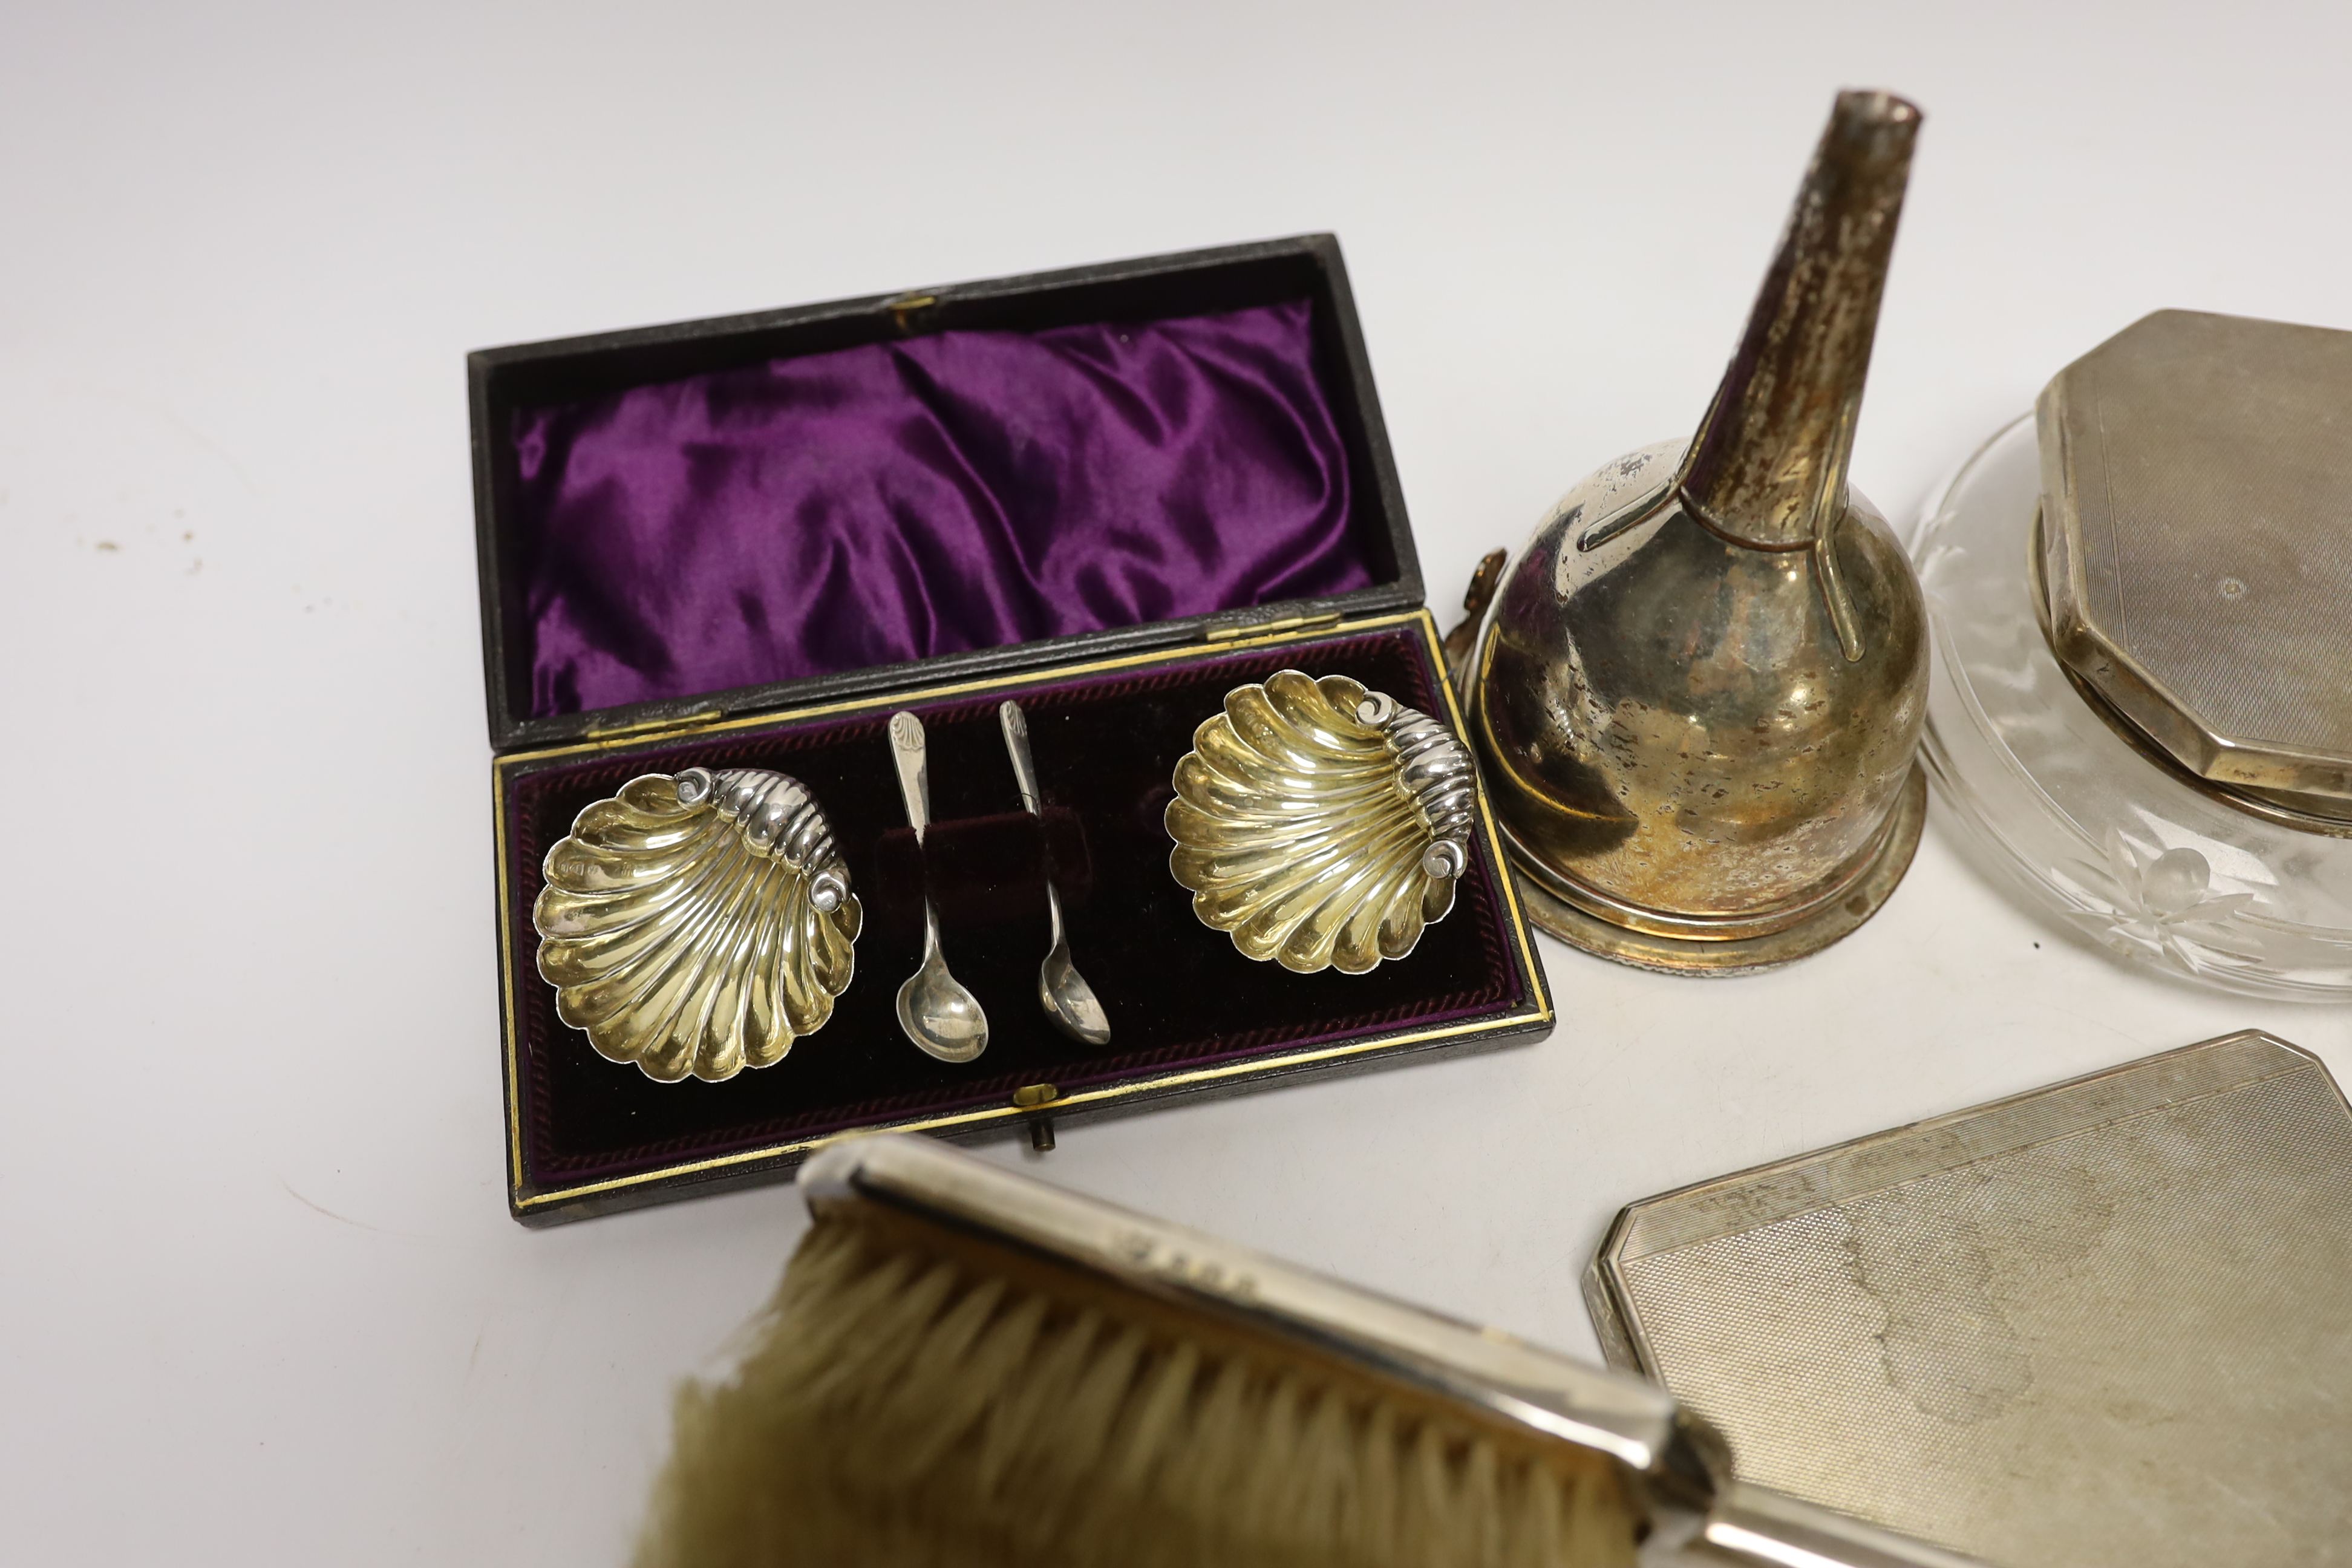 A group of assorted small silver, including a powder jar, trinket box, cigarette case, mirror and brush set etc. and a plated wine funnel.